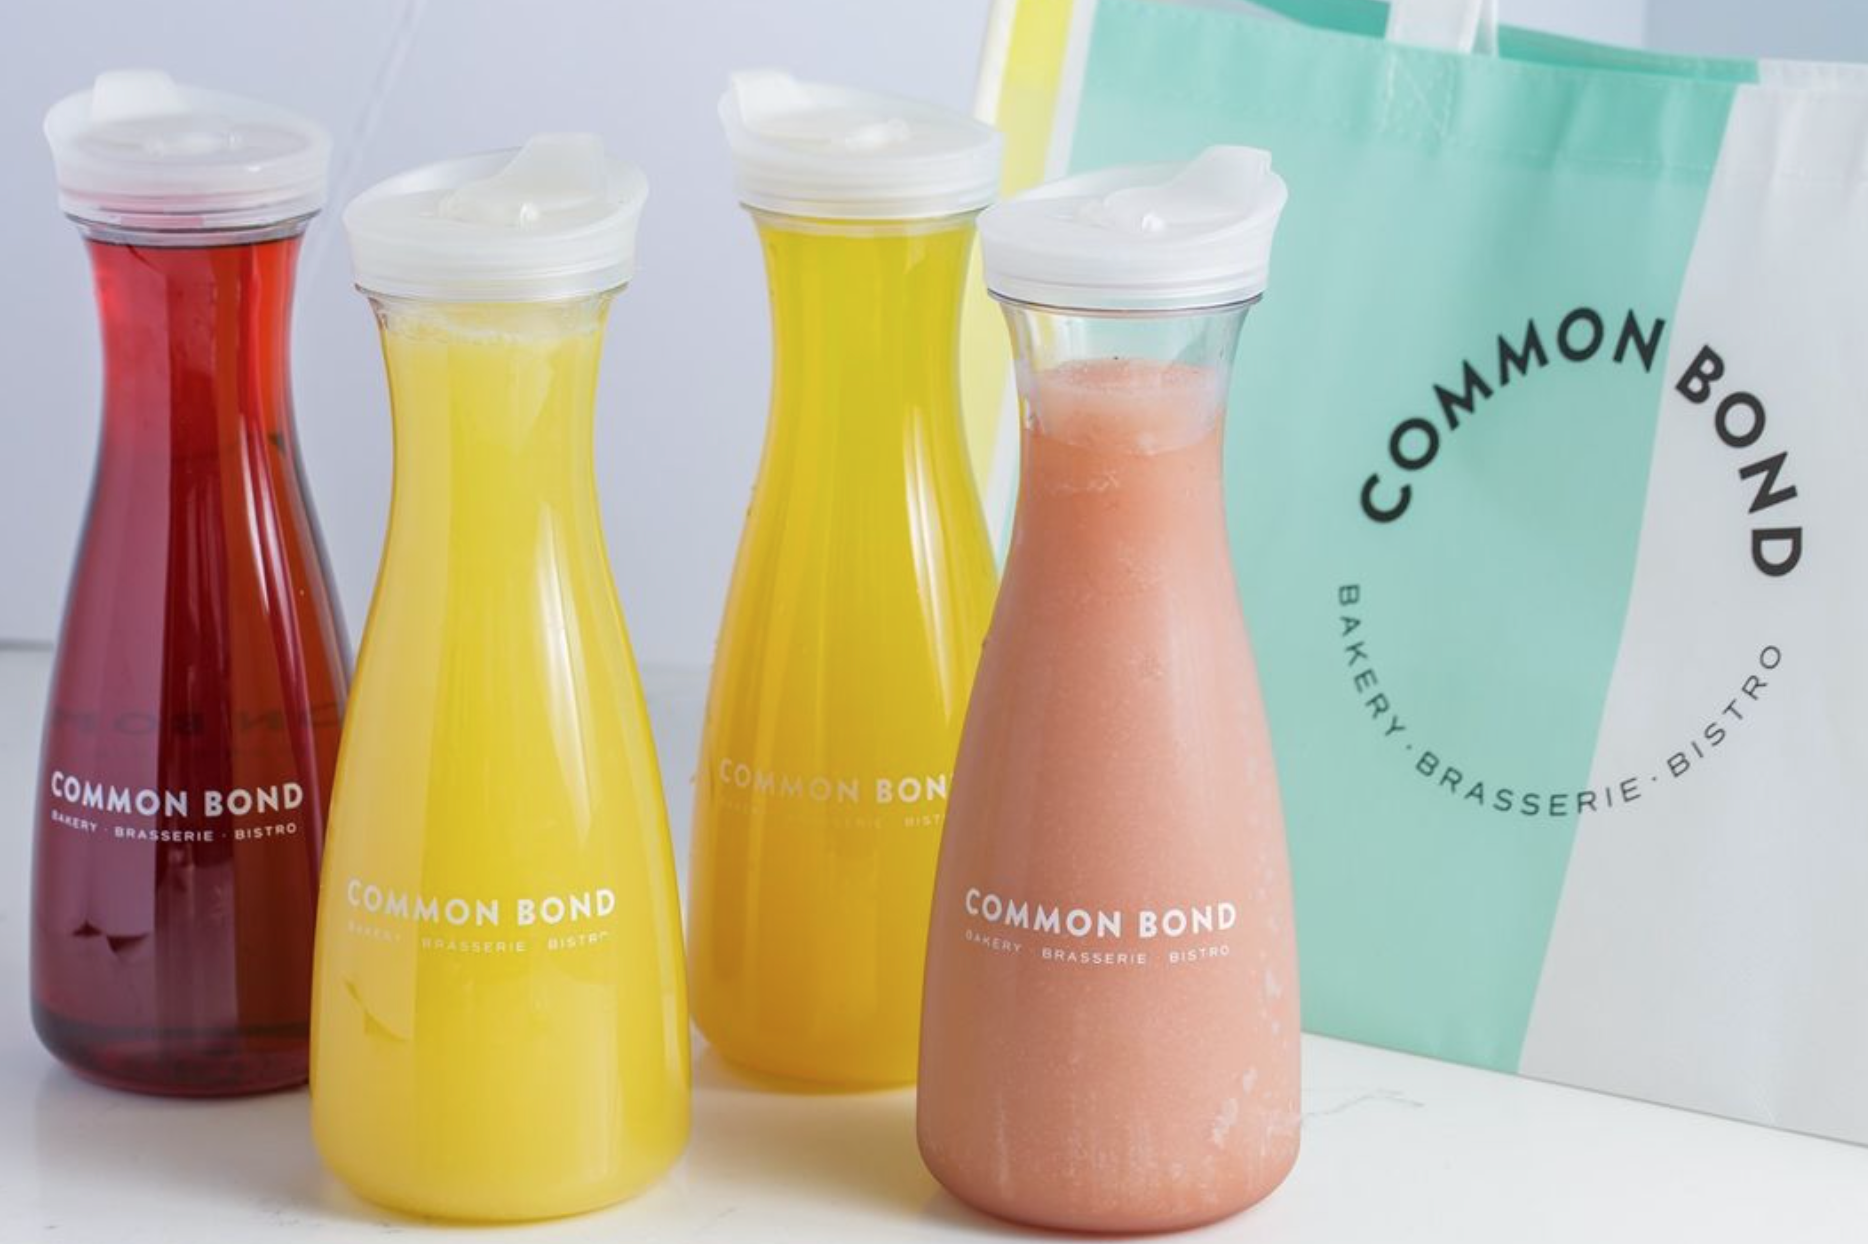 To-go carafes full of mimosas and frosé available at Common Bond Bistro & Bakery in Houston, TX.